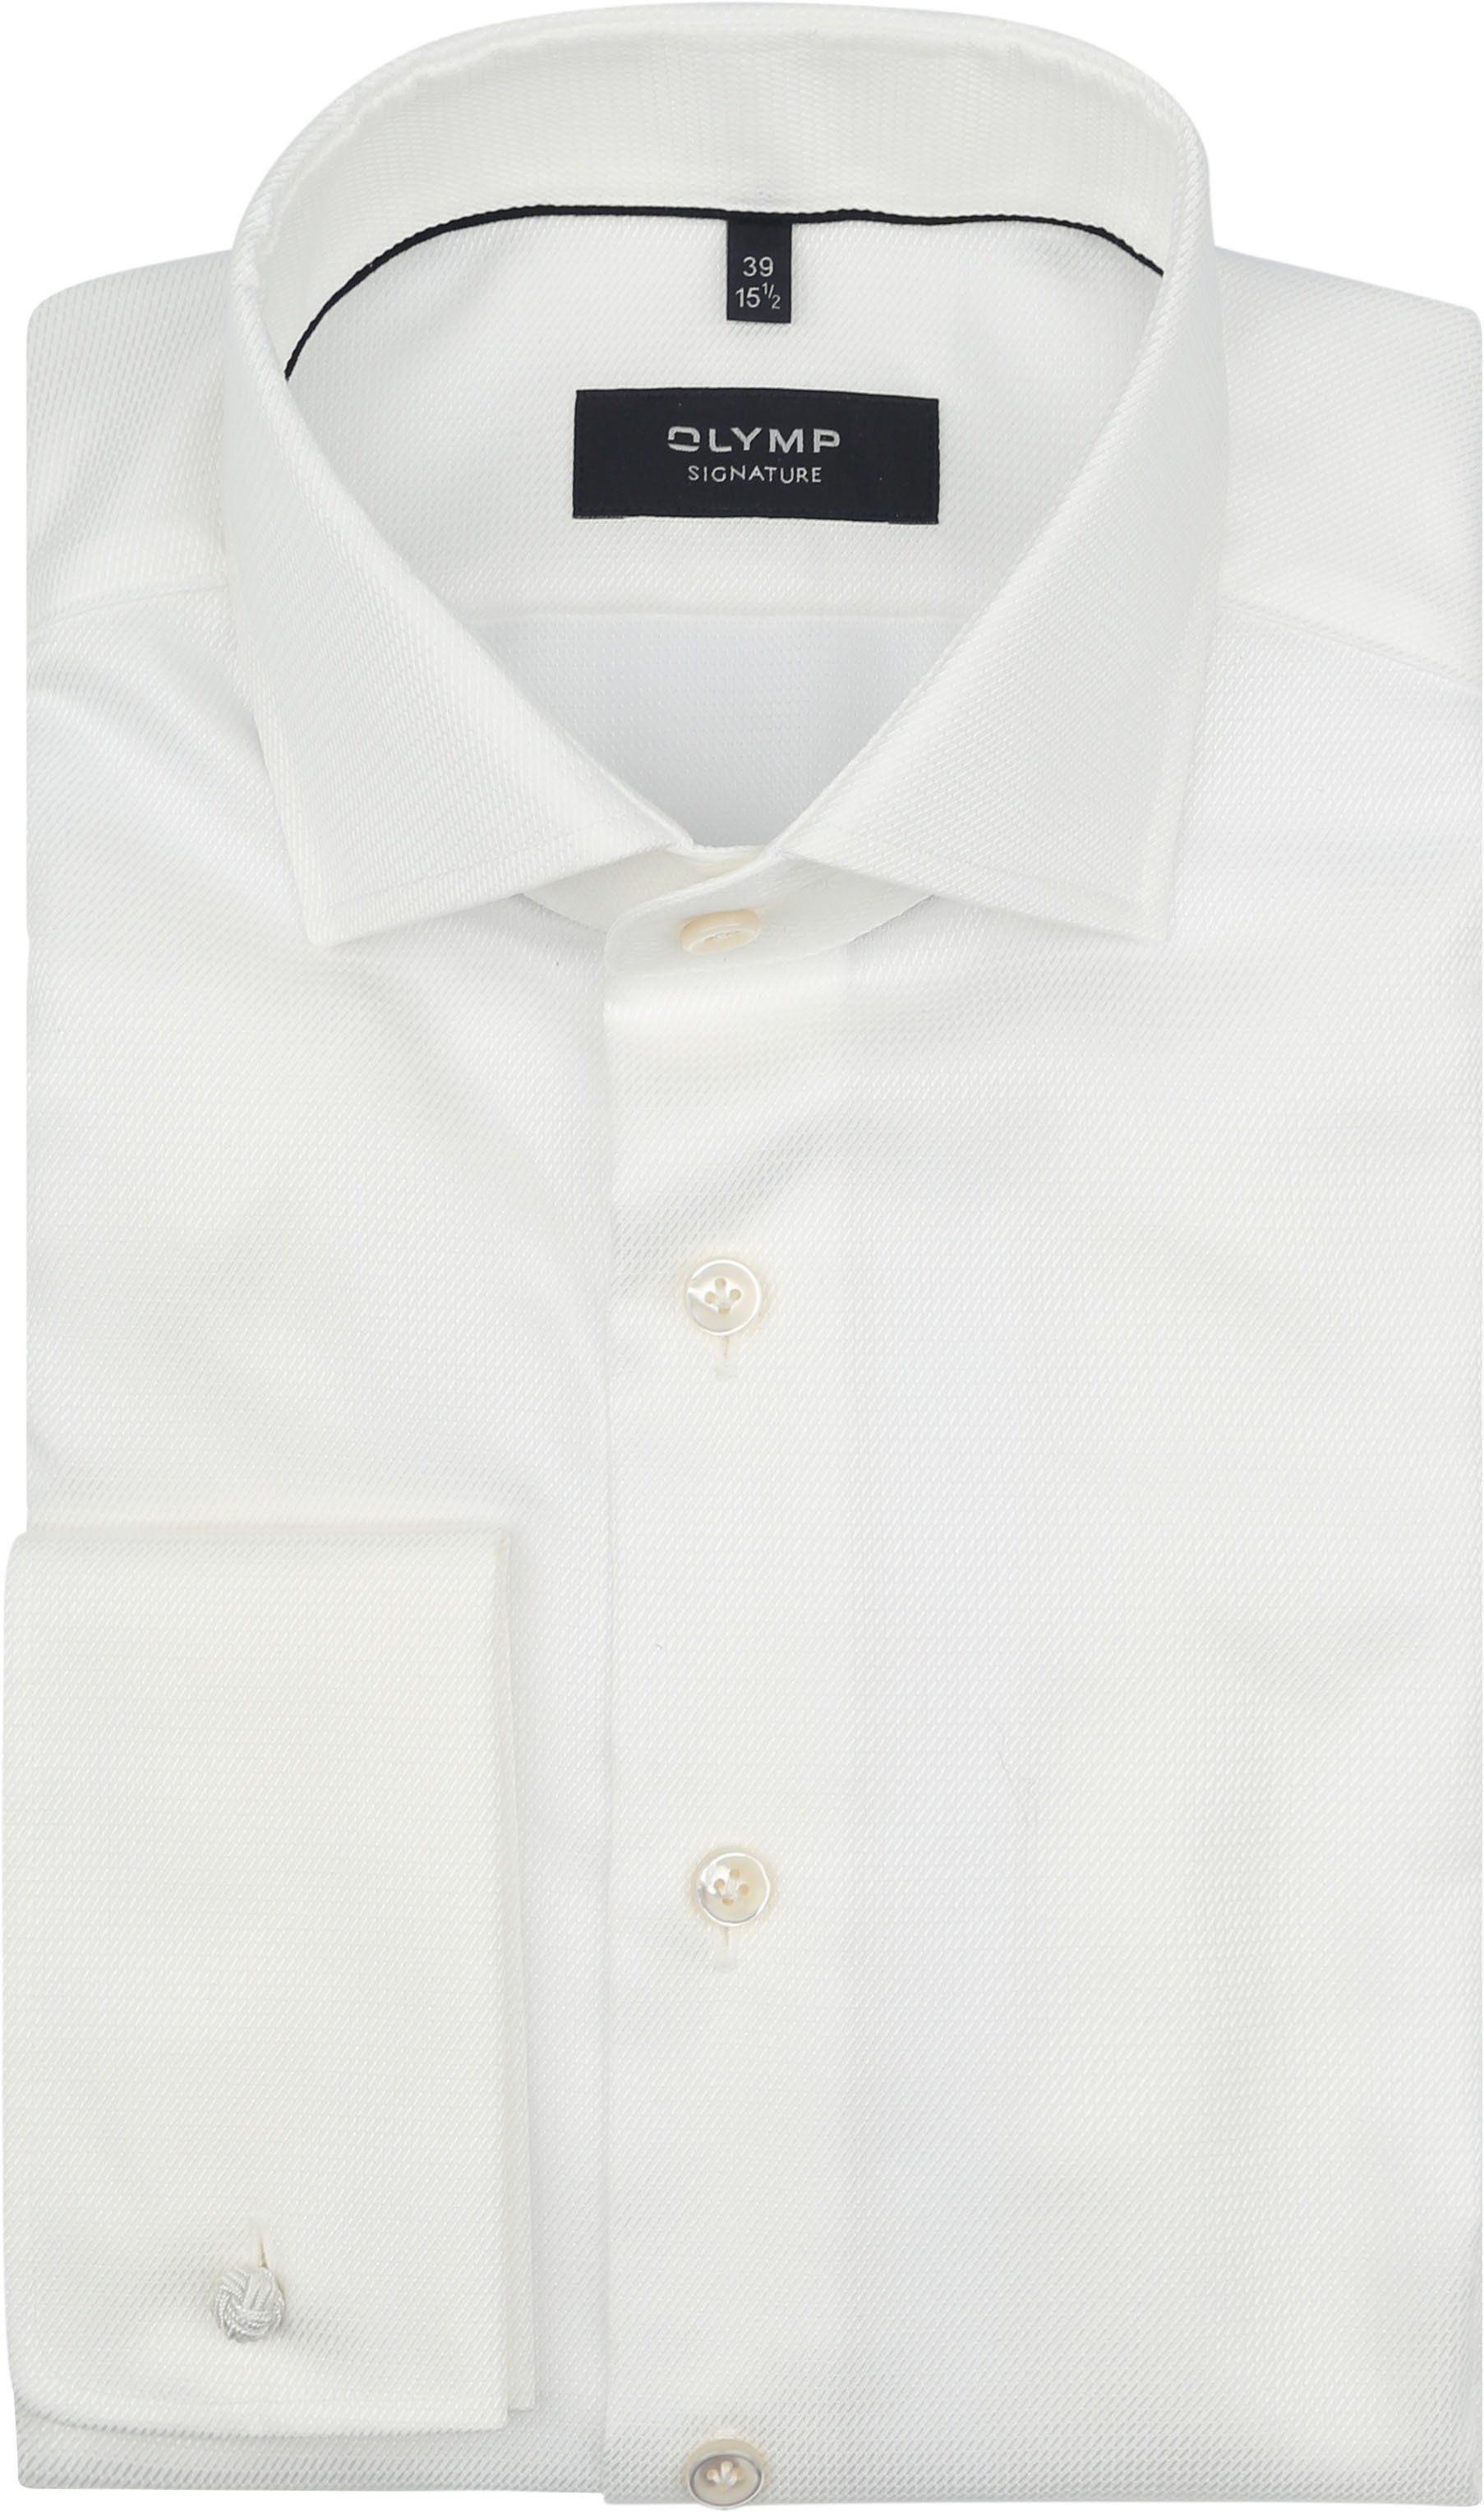 Olymp Signature Shirt Champagne White size 45 product